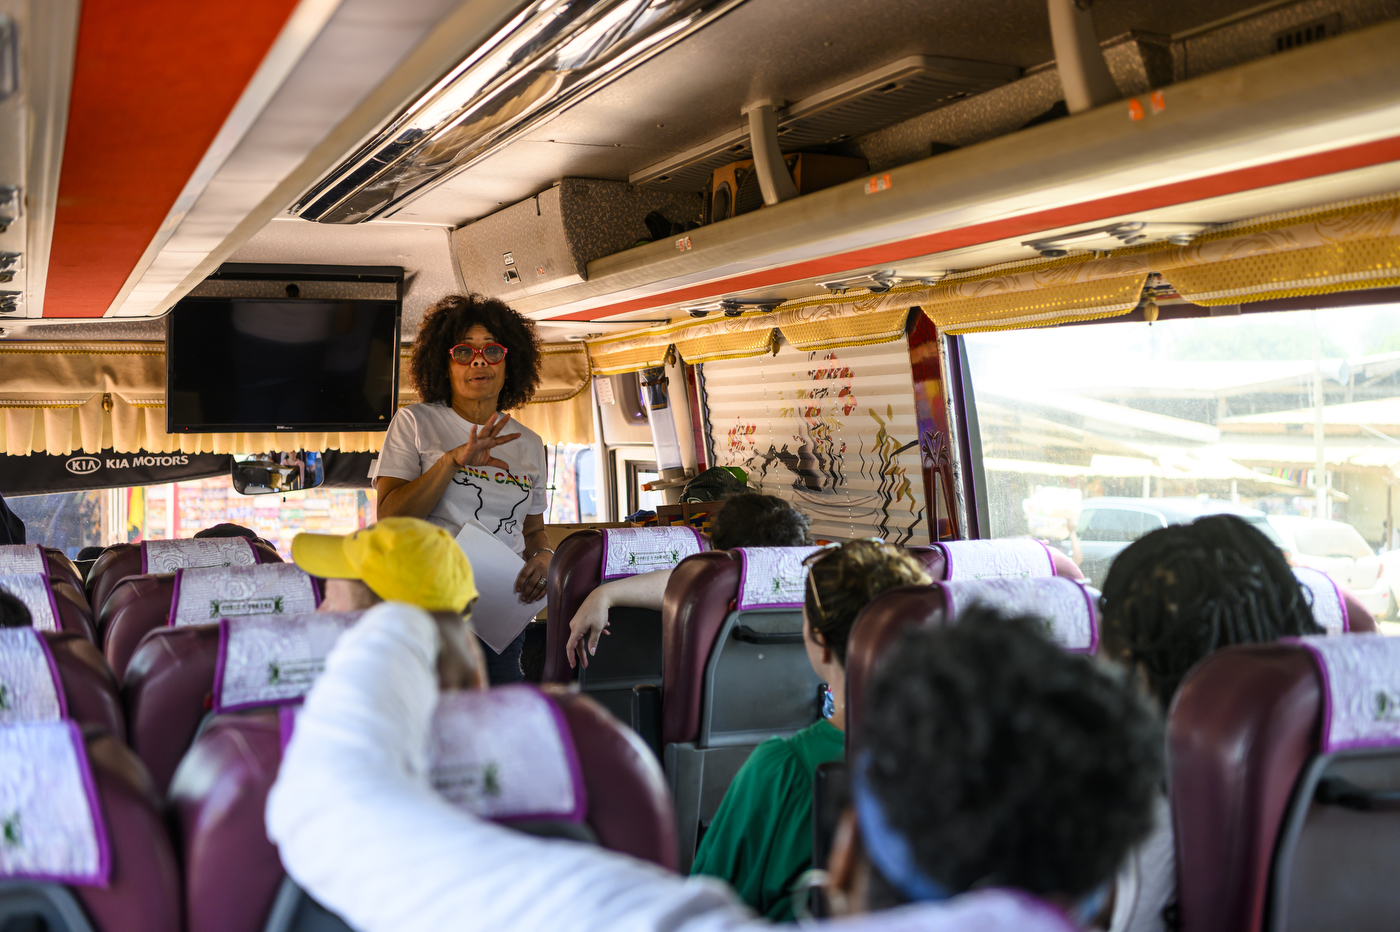 Dr. Vanessa Johnson speaking to people on a bus